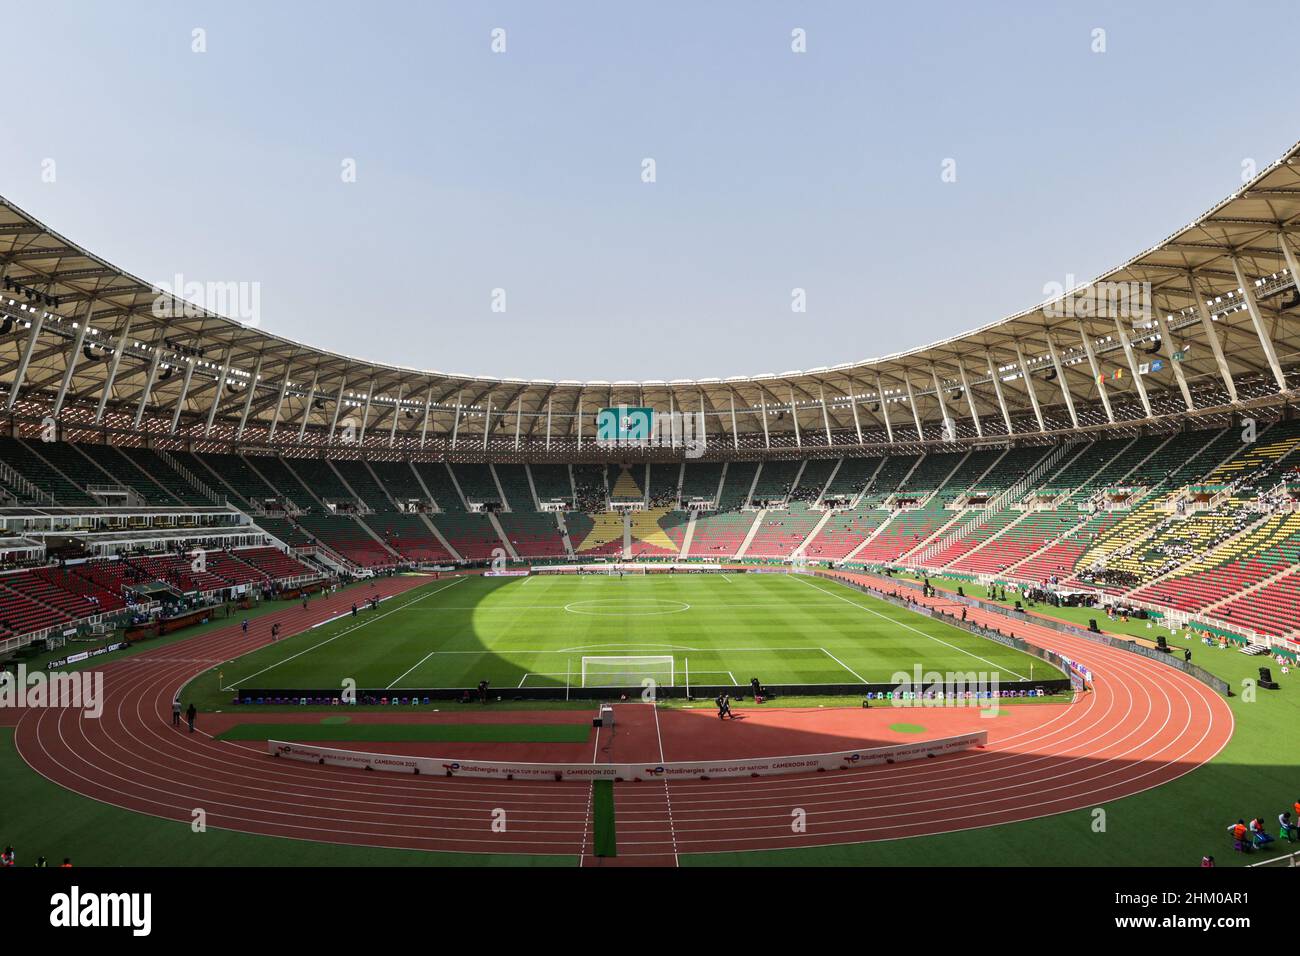 CAMEROON, Yaounde, February 06 2022 - A general view of the stadium d'Olembe prior to the Africa Cup of Nations Final between Senegal and Egypt at Stade d'Olembe, Yaounde, CMR 06/02/2022 Photo SFSI Credit: Sebo47/Alamy Live News Stock Photo